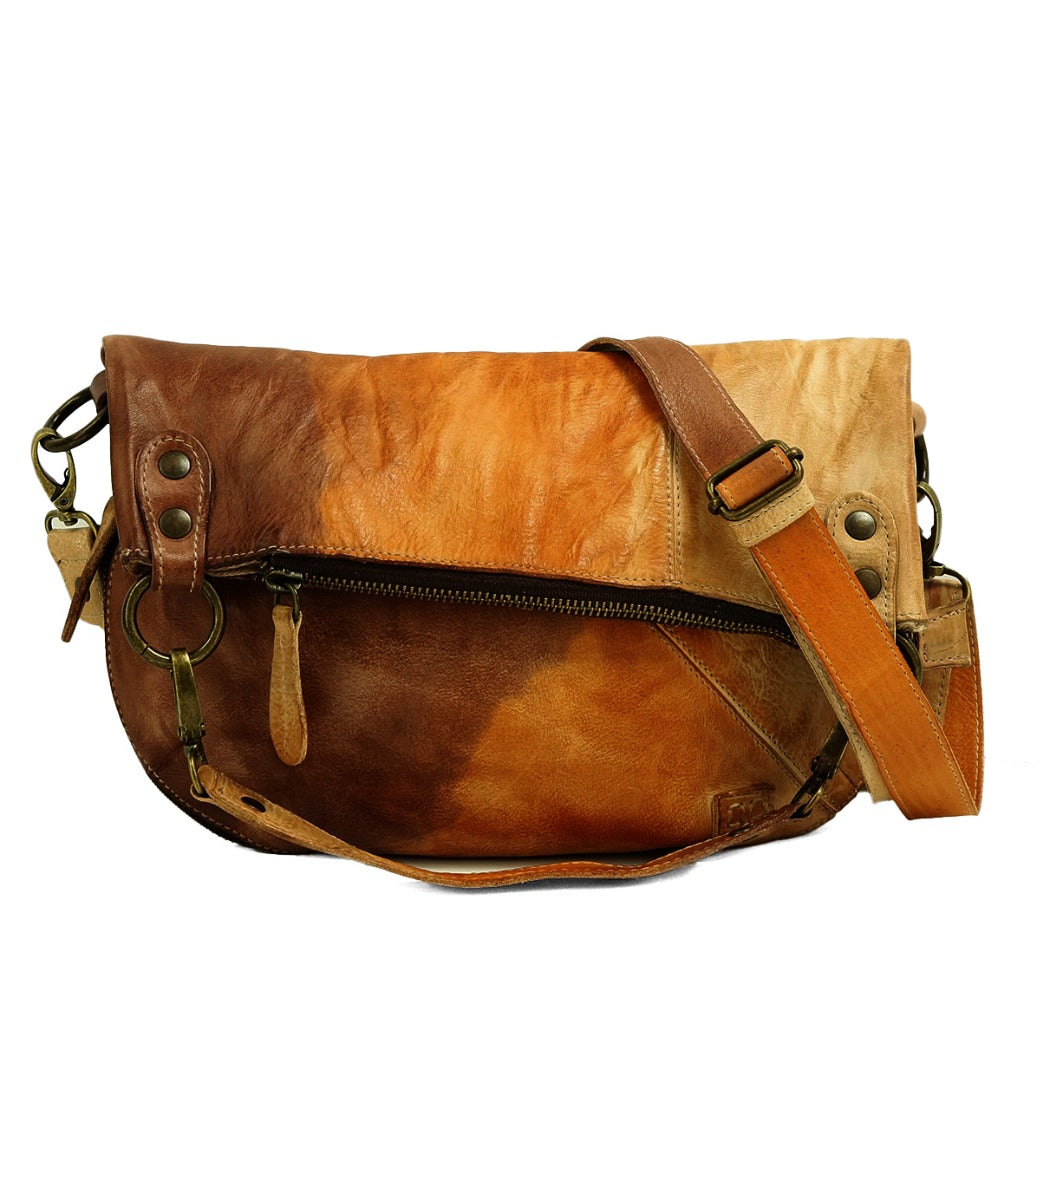 A Brown and Tan Leather Crossbody Bag: The Tahiti by Bed Stu.